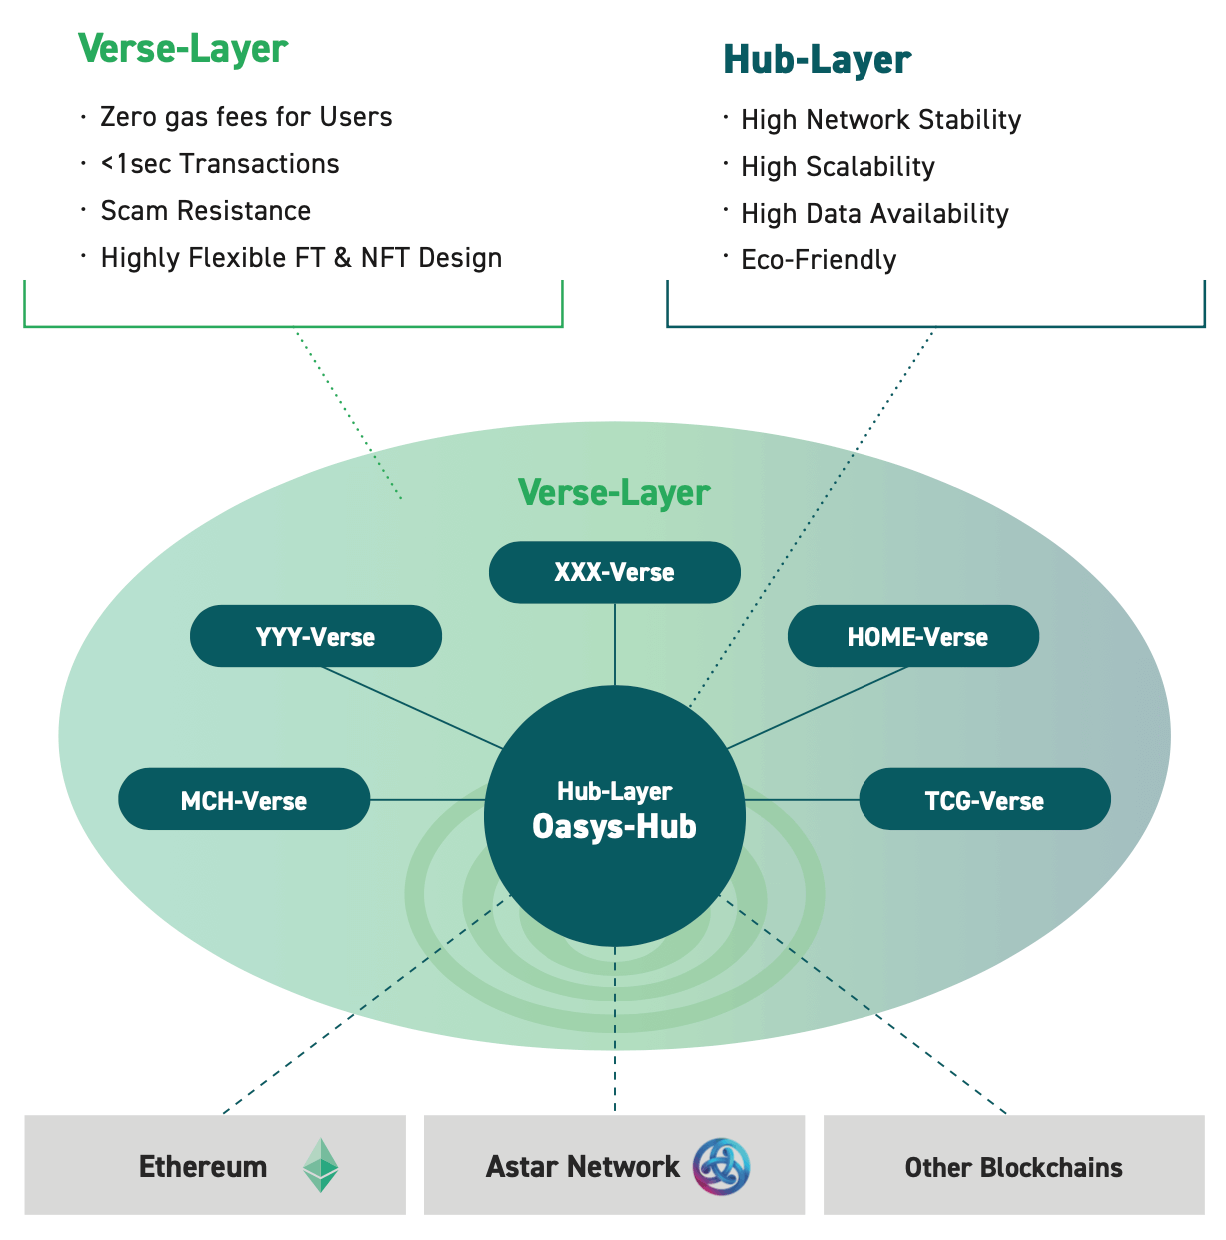 Verse Layer and Hub Layer